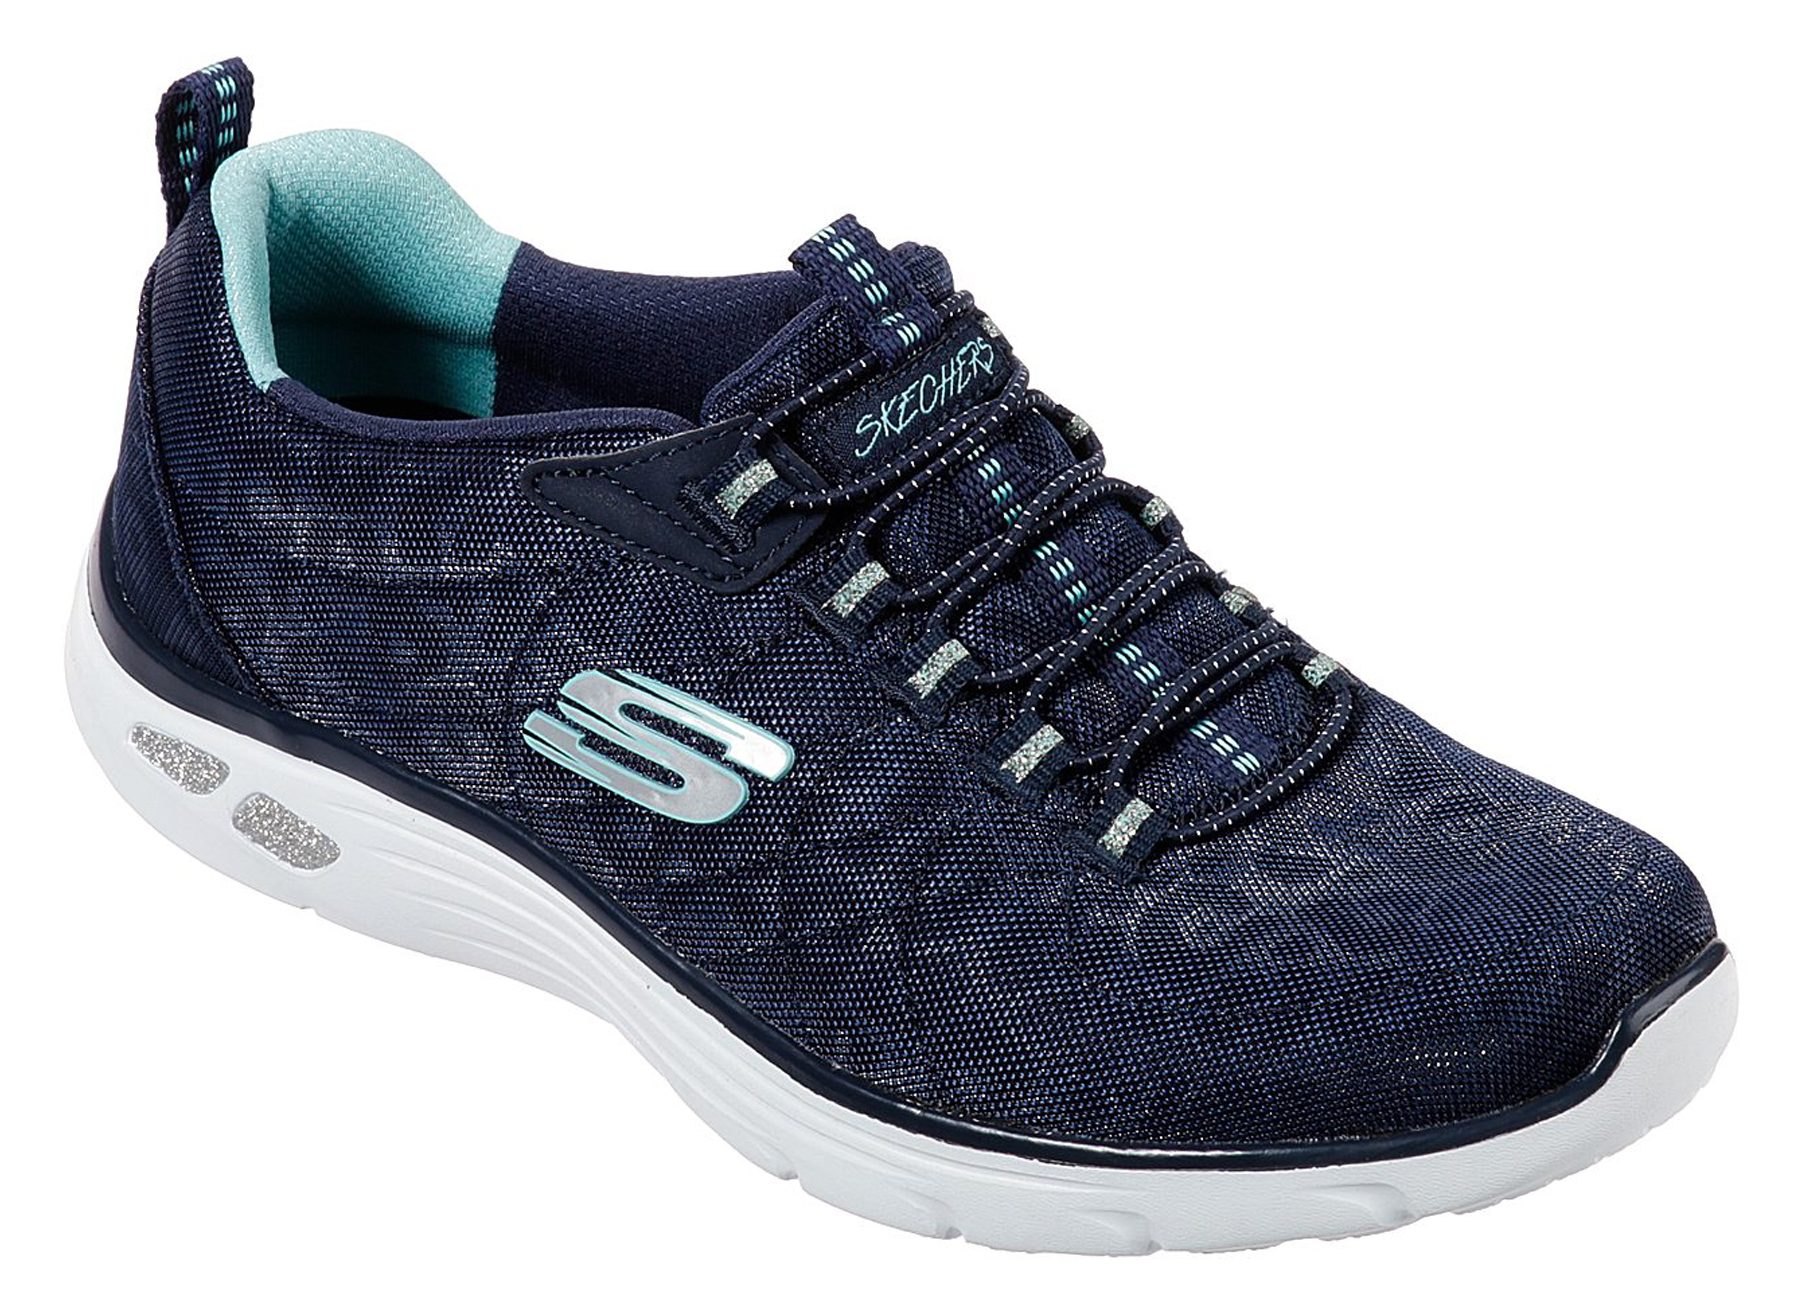 Skechers Relaxed Fit: Empire D'Lux - Spotted Navy 12825 NVY - Womens ...